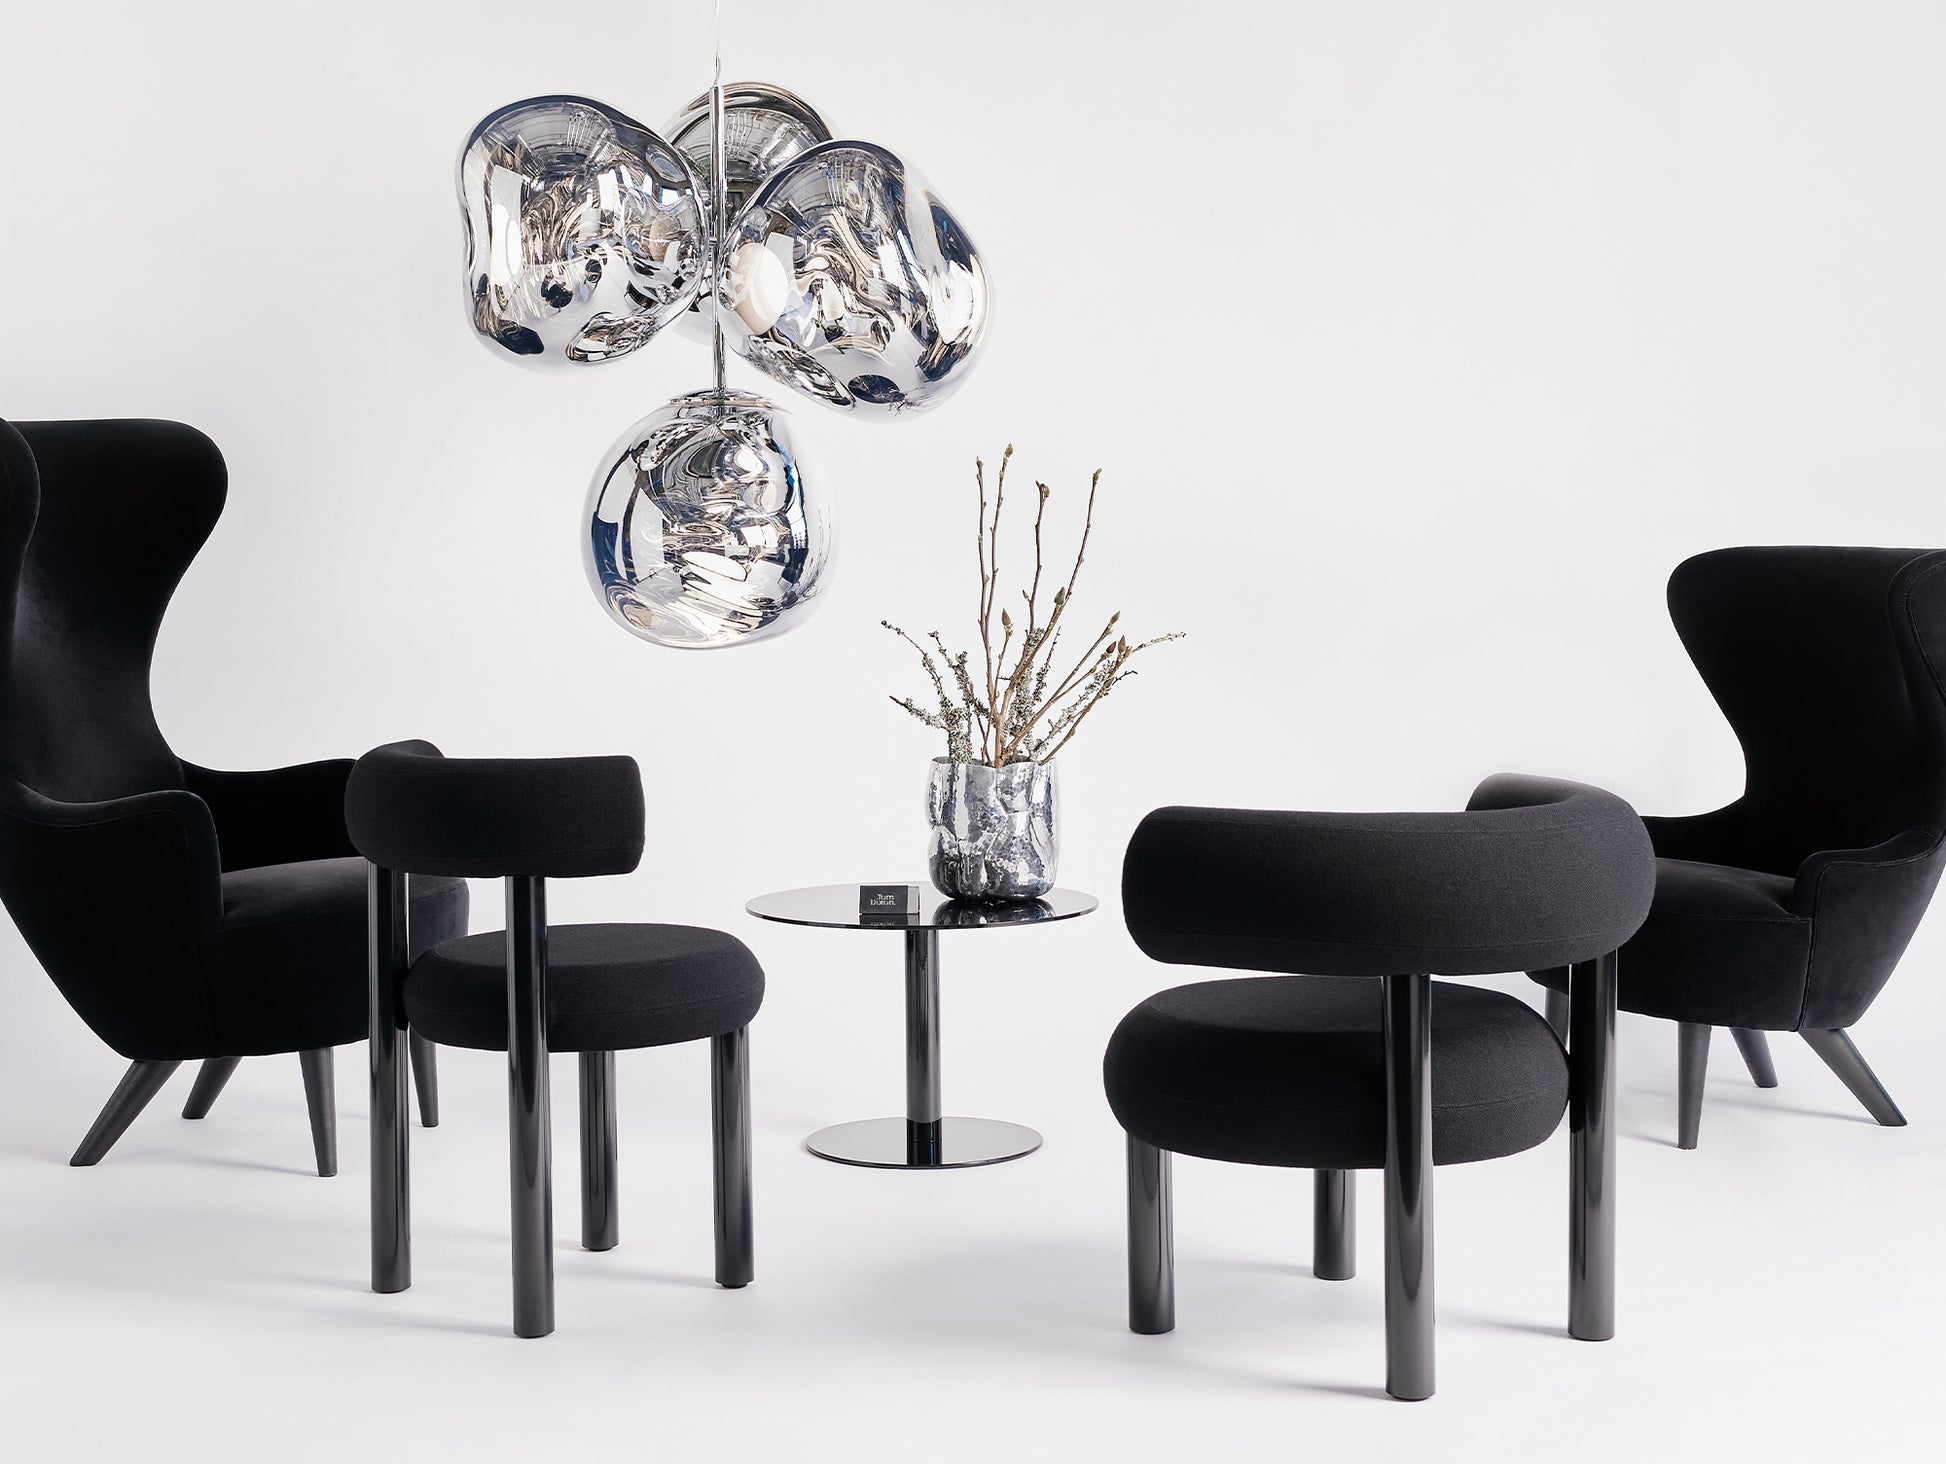 Fat Dining Chair by Tom Dixon